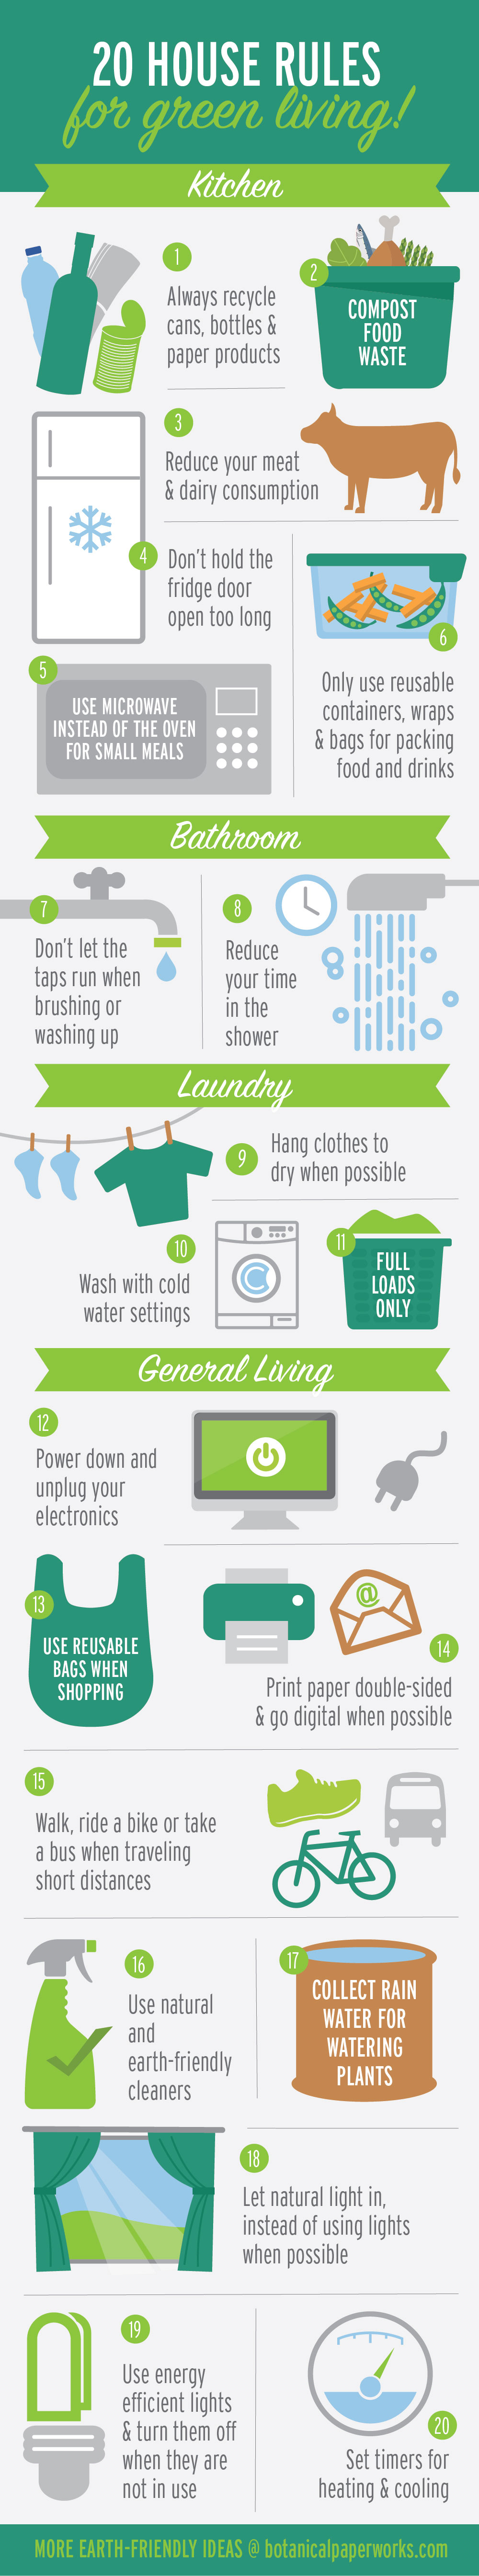 Share this handy infographic filled with eco tips with all the members of your family to get them into the habit of making green choices every day.